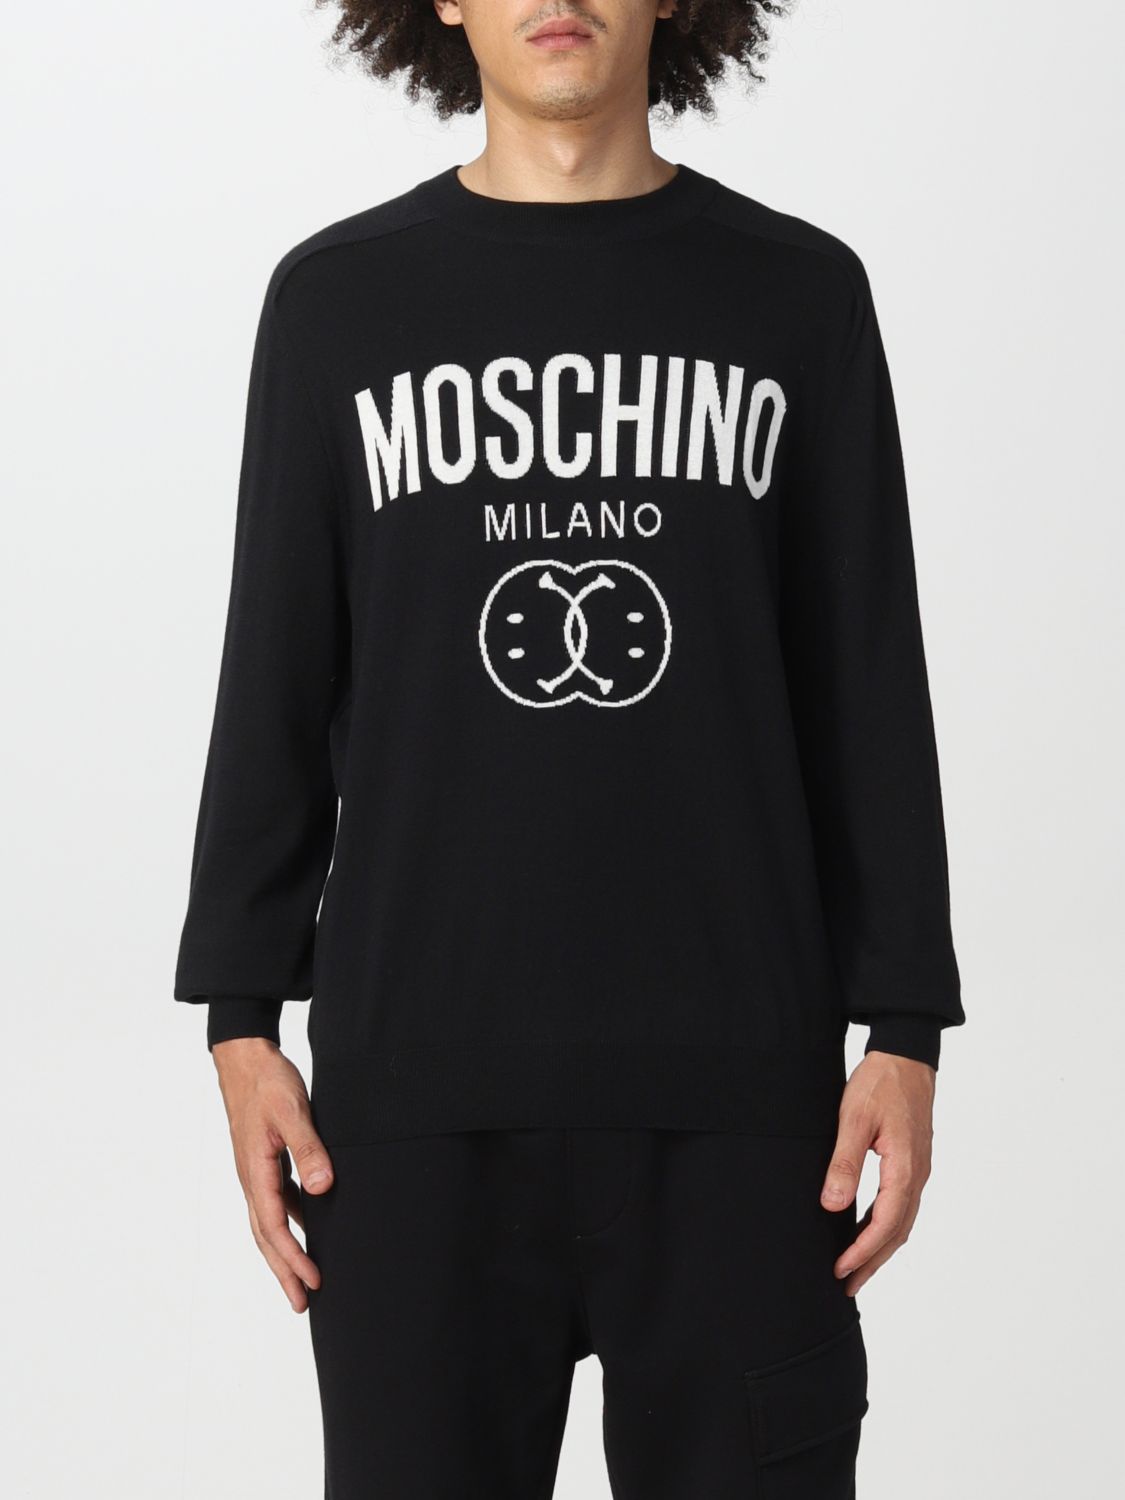 MOSCHINO COUTURE: Sweater men - Black | Sweater Moschino Couture ...